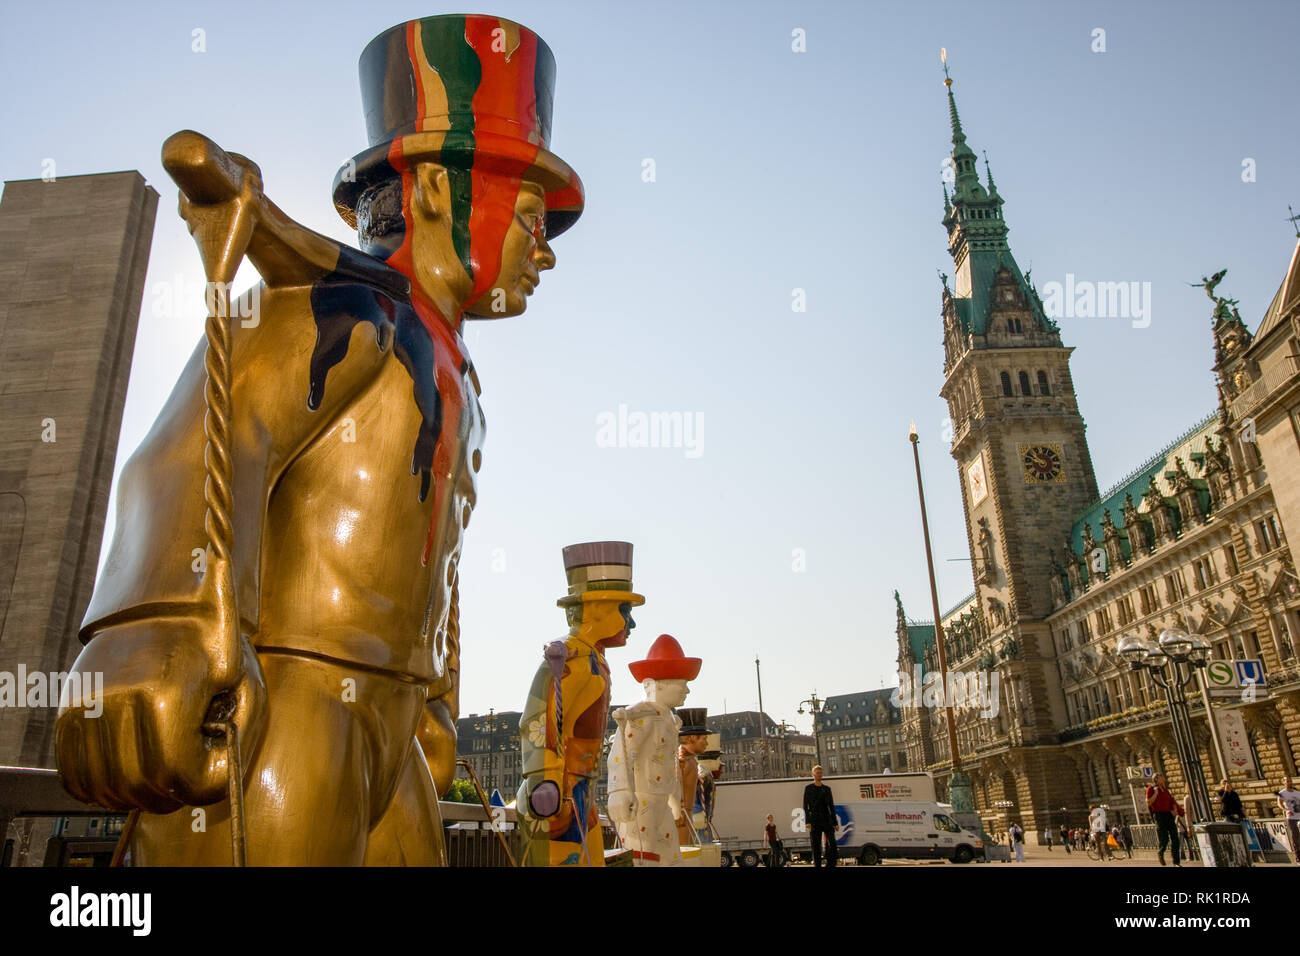 Hamburg, Germany; View of the Rathaus (Town Hall) with statues of the city mascot, Hans Hummel. Stock Photo